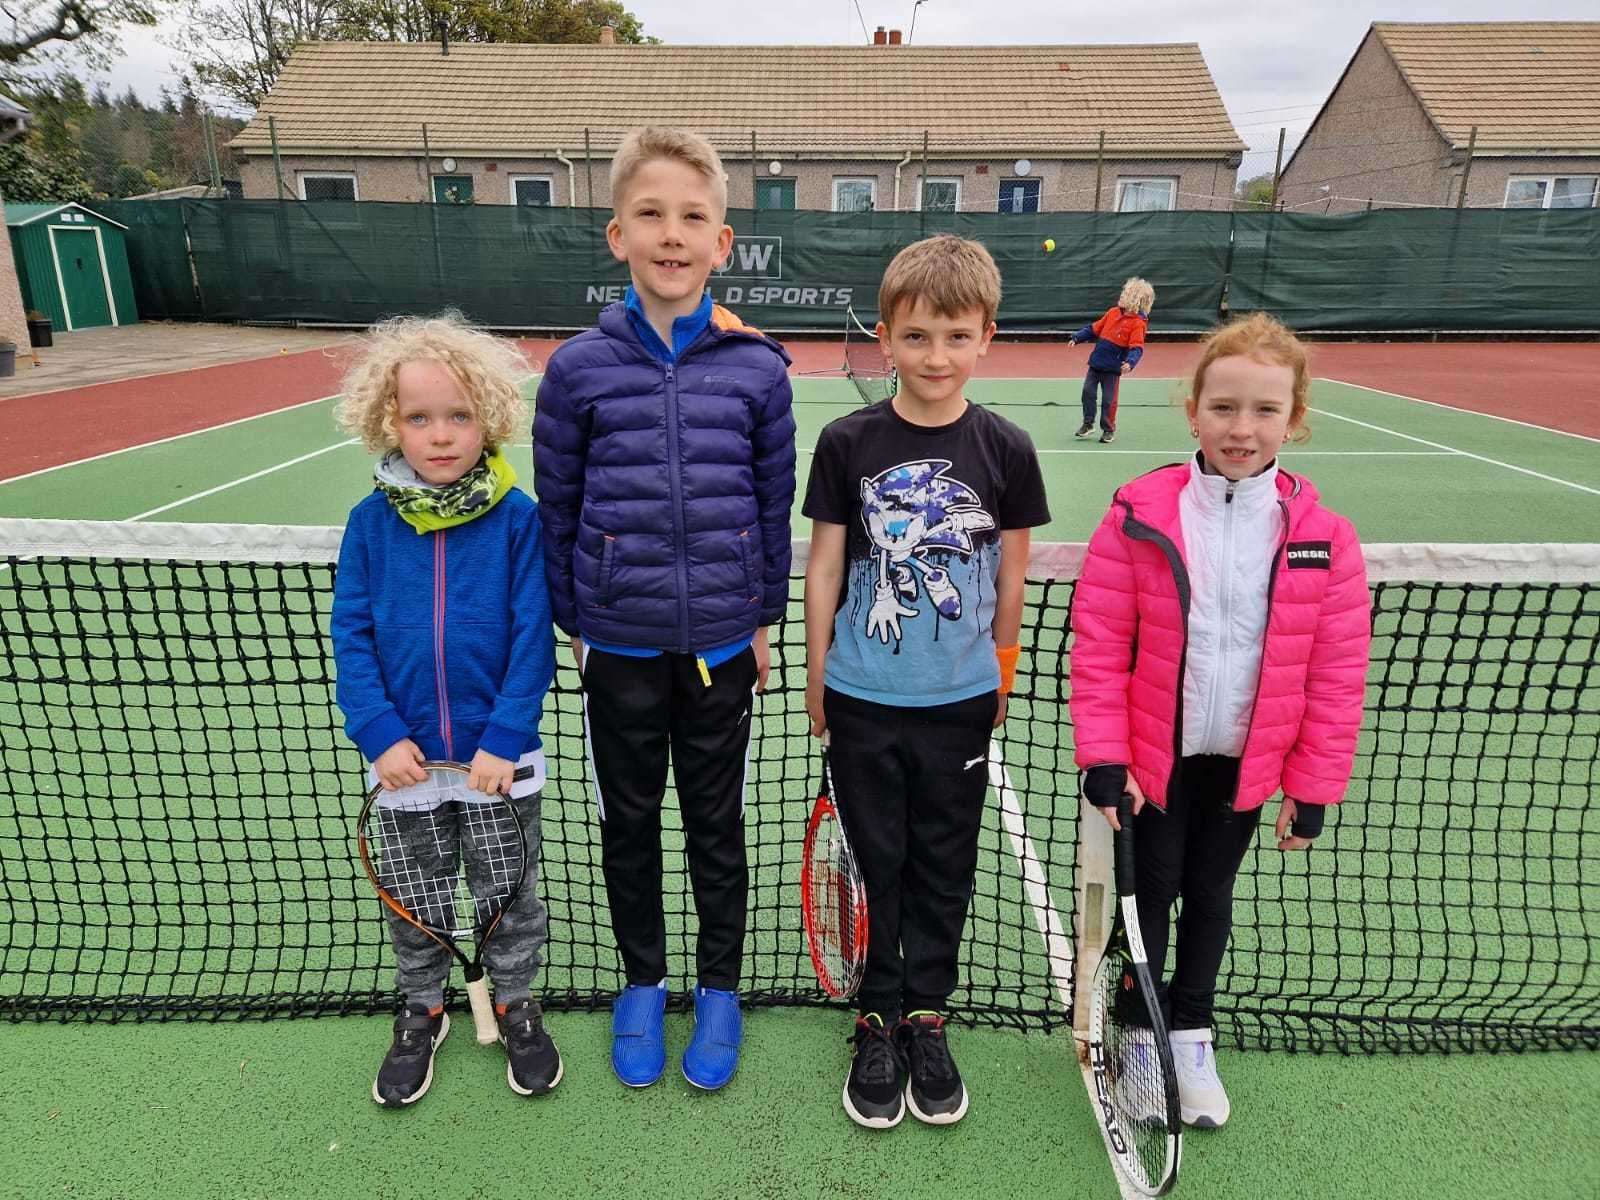 Forres tennis Club's 8-and-under juniors who won both matches last week, from left: Byron Johnson, Harris Hepburn, Rhys Forwood and Isla Fielding.